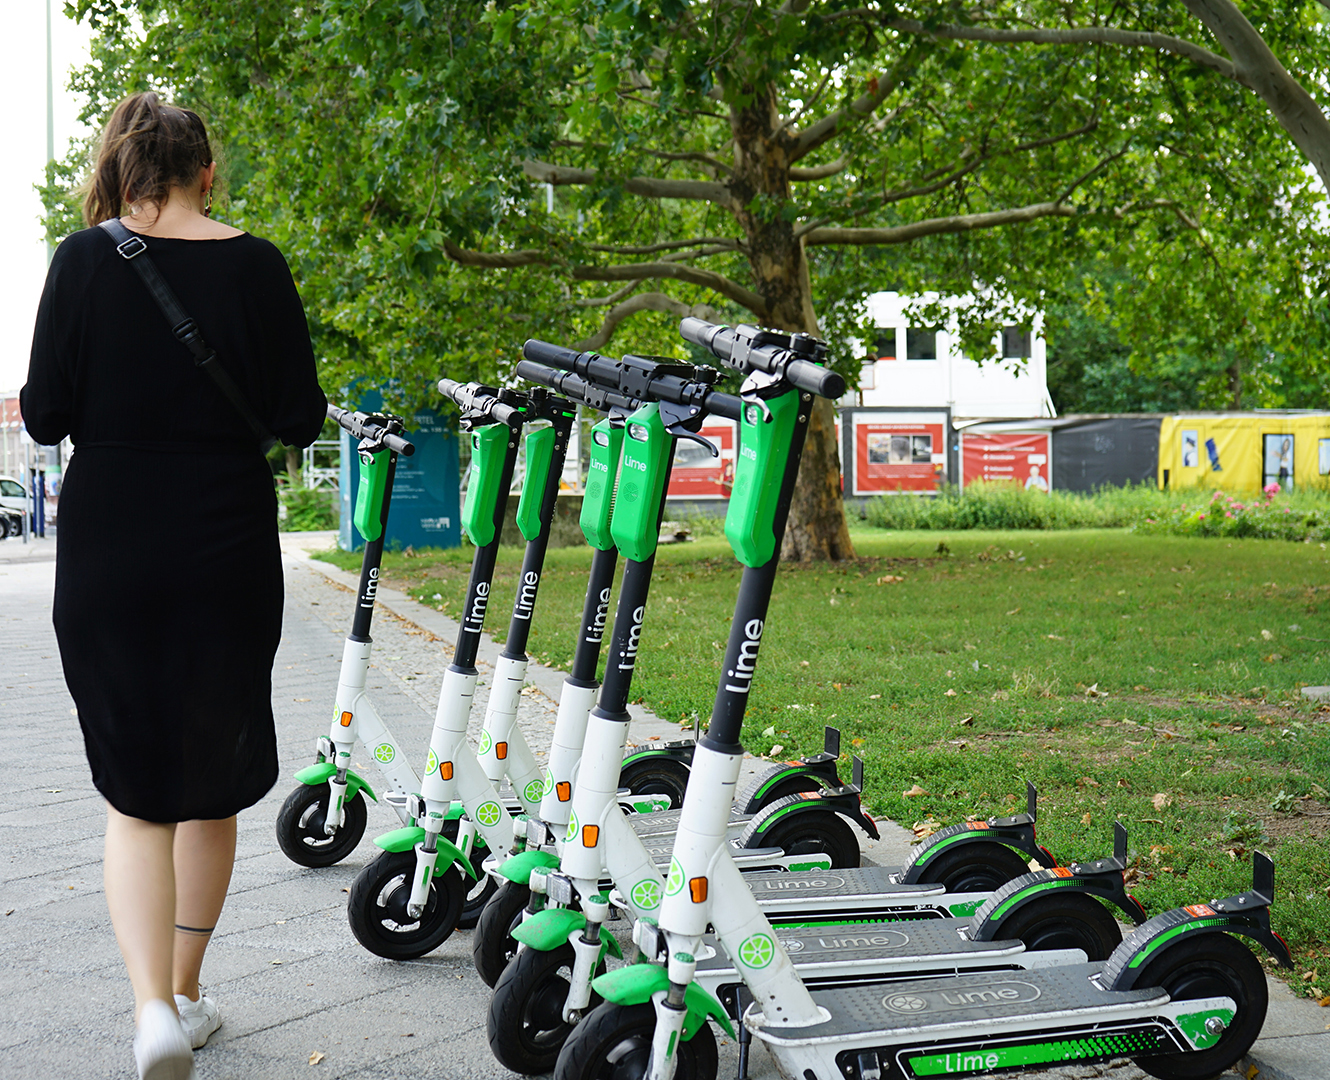 NAIT has been removed from list of approved zones for e-scooters